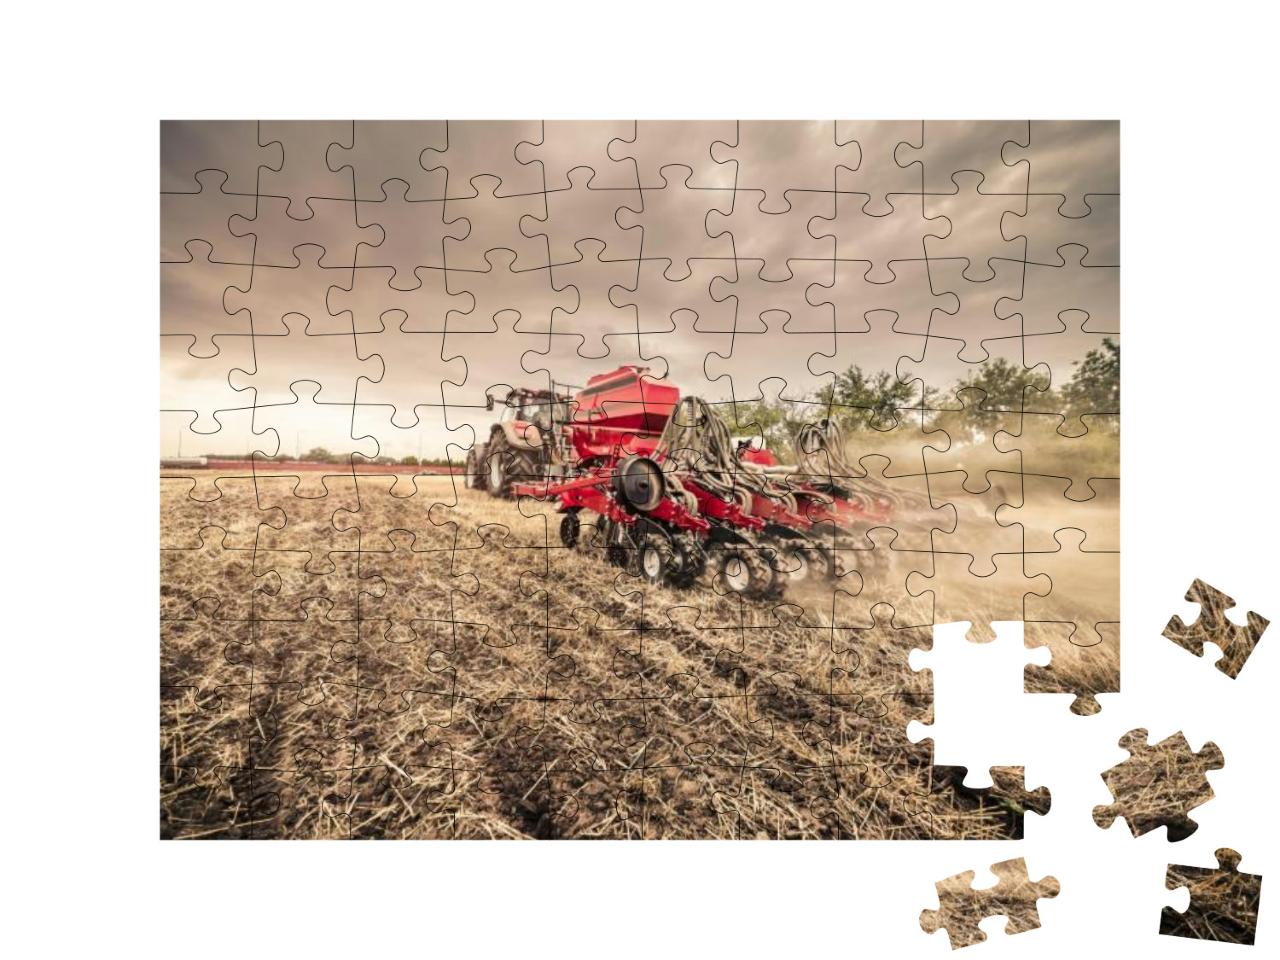 Modern Red Tractor with Red Implement Seeding Directly In... Jigsaw Puzzle with 100 pieces